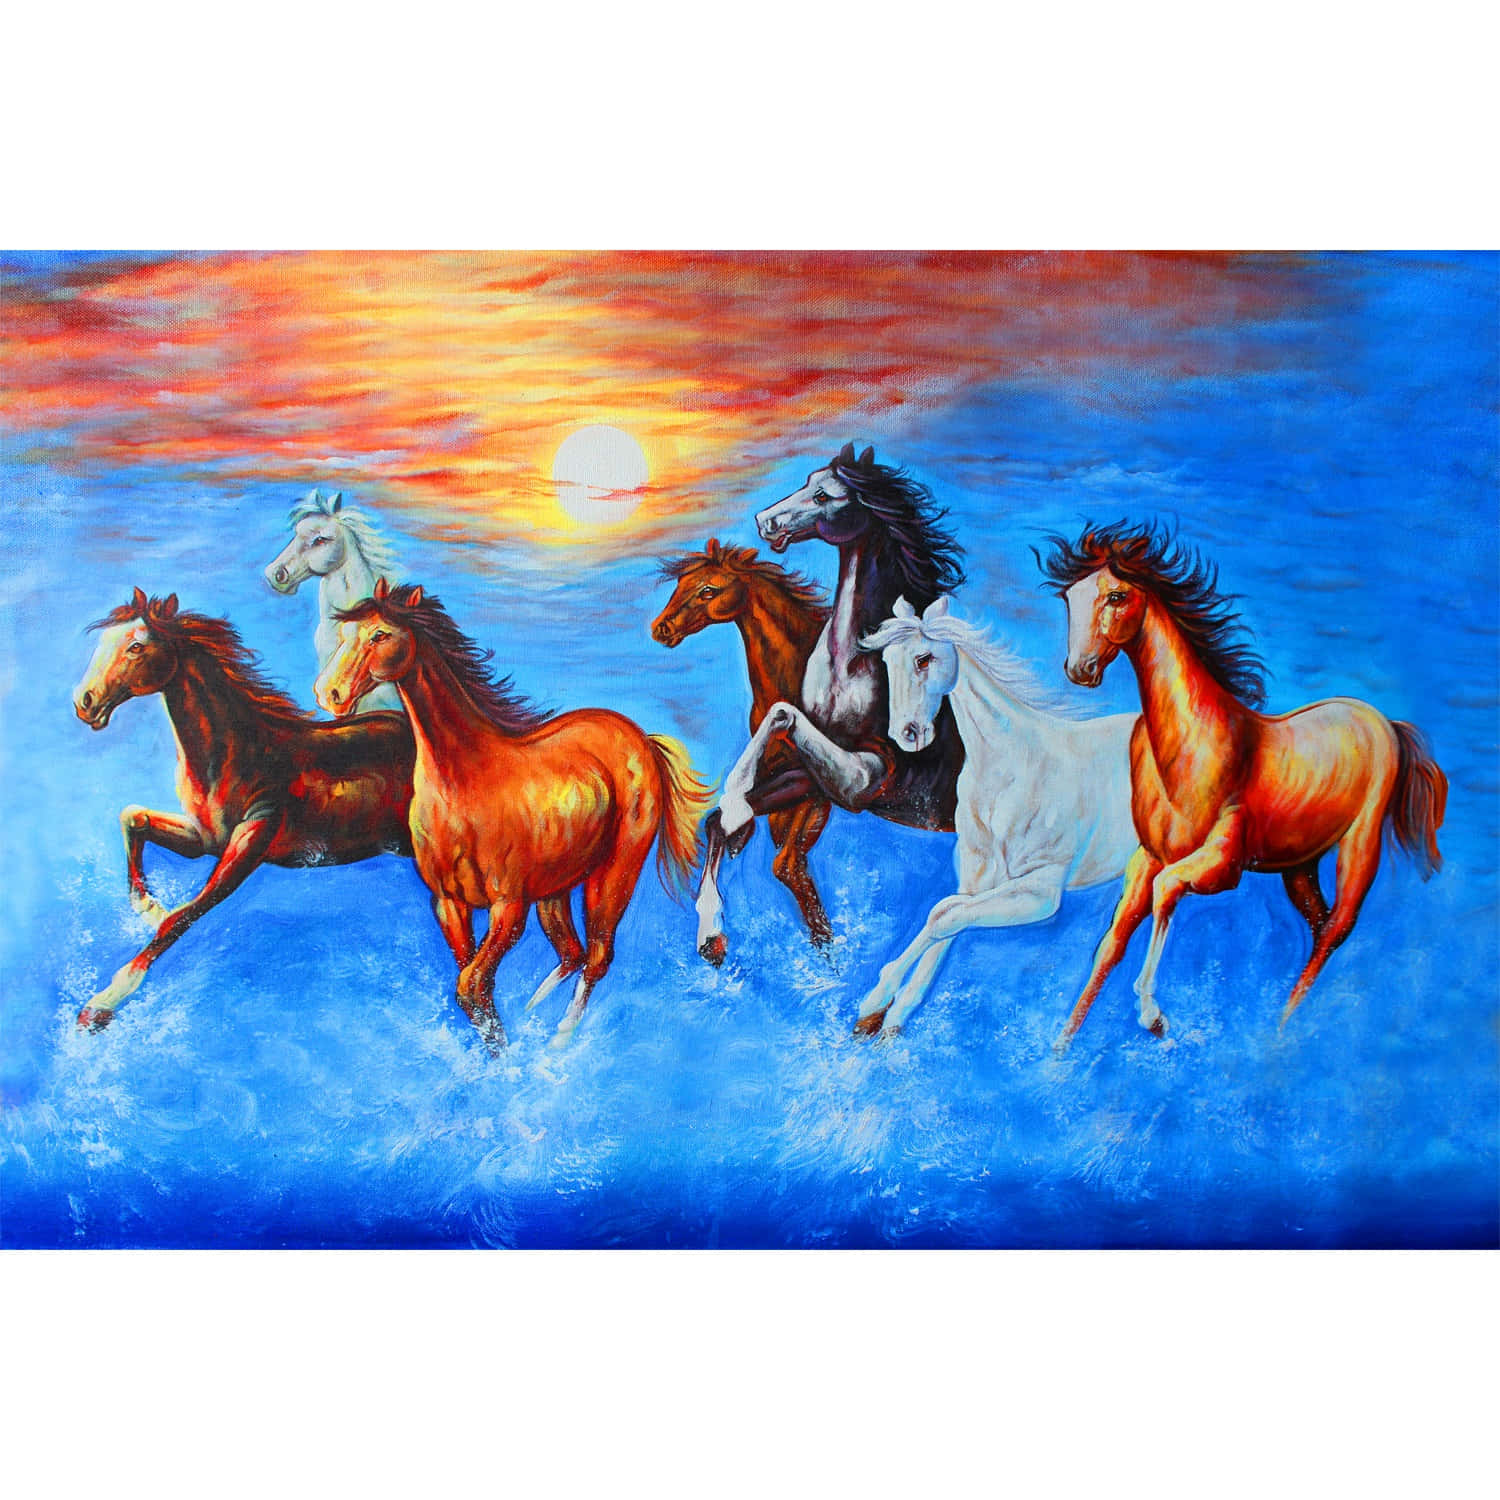 7 Horses On The Water Painting Wallpaper